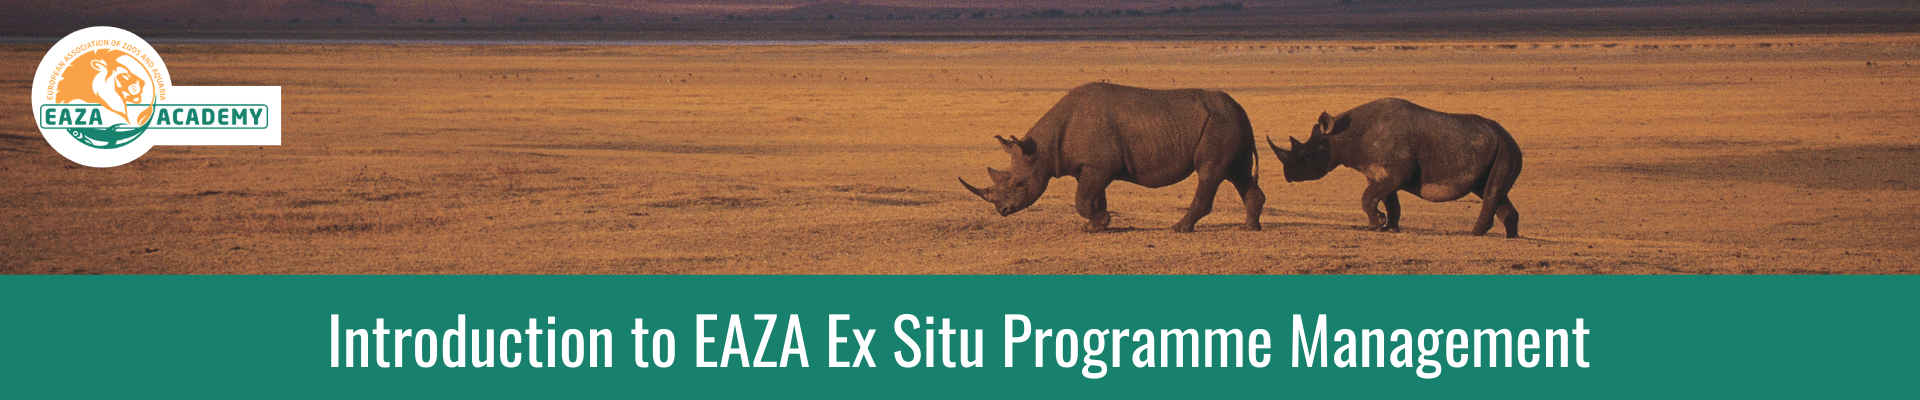 Introduction to EAZA Ex situ Programme Management_March 2021